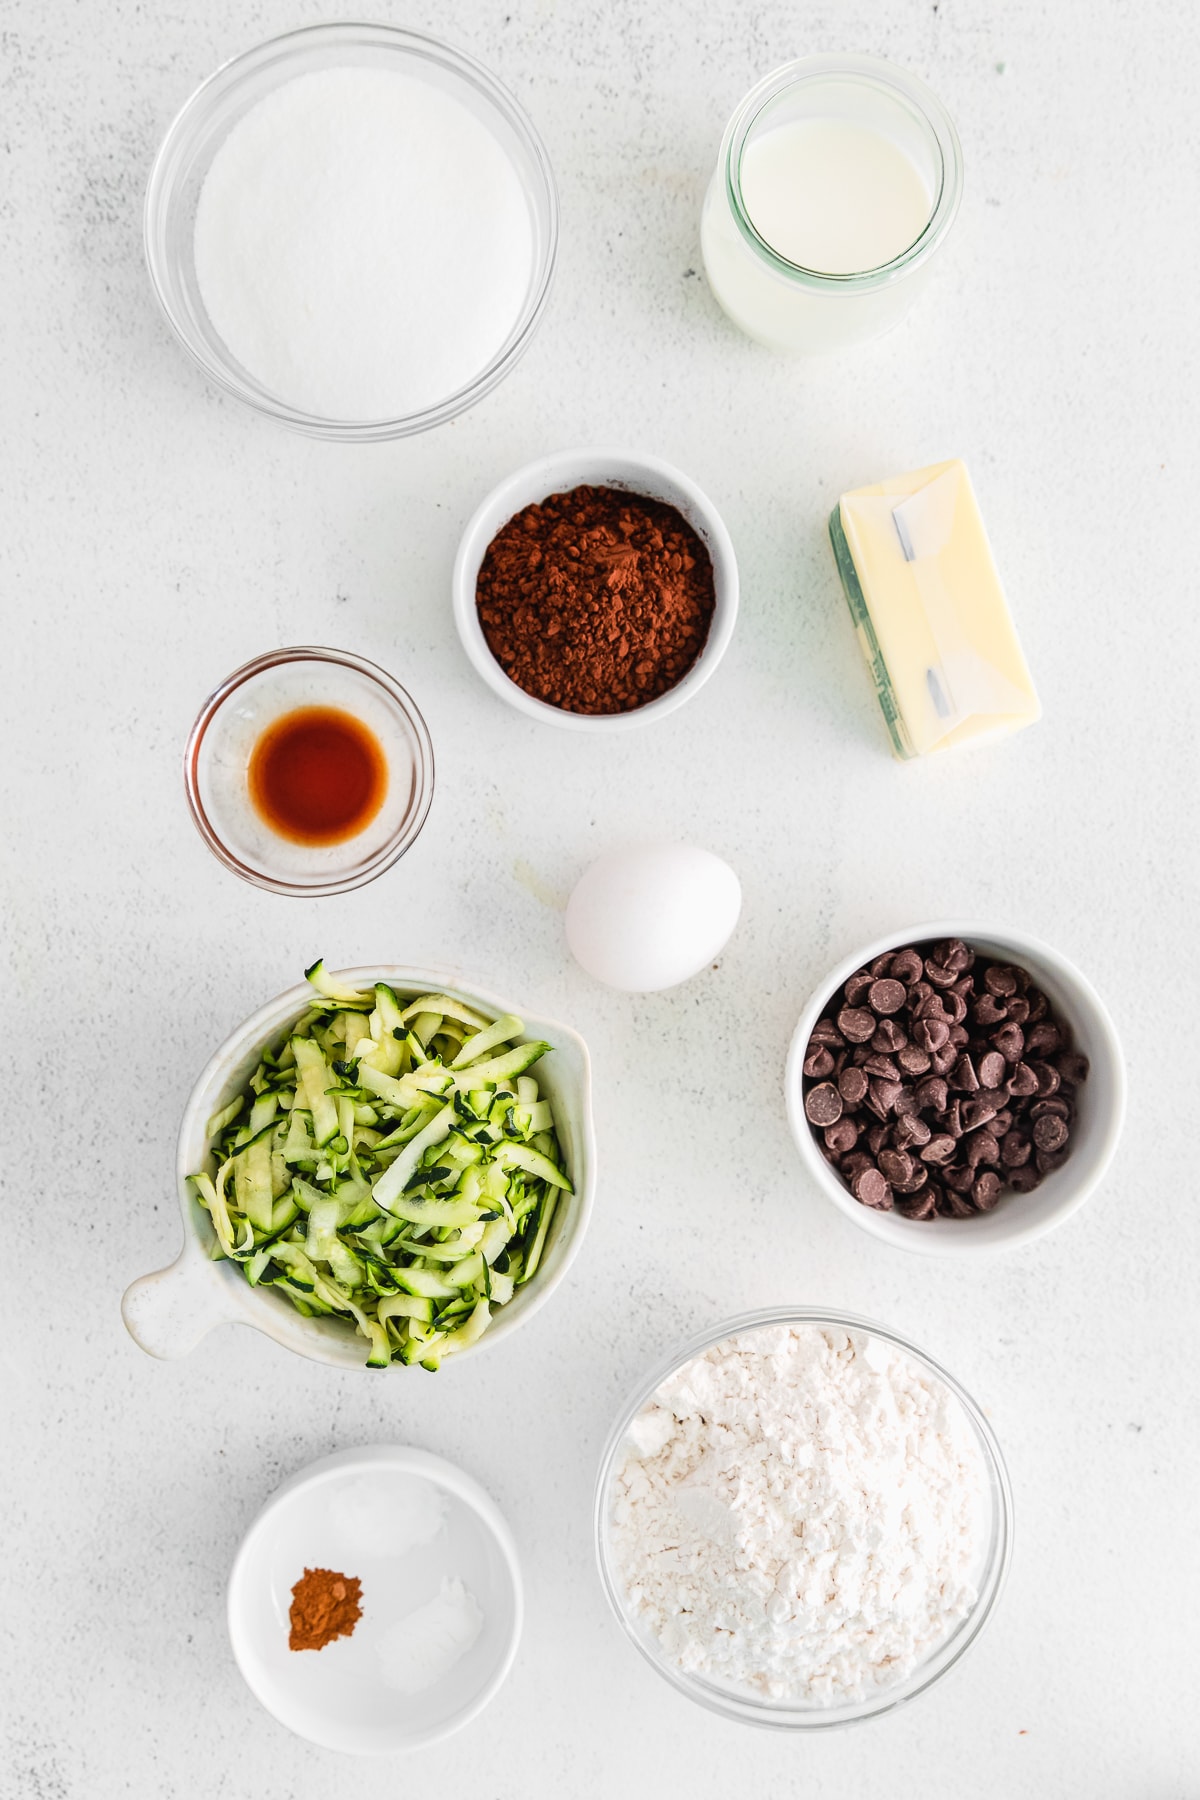 ingredients in small bowls to make double chocolate chip zucchini bread.